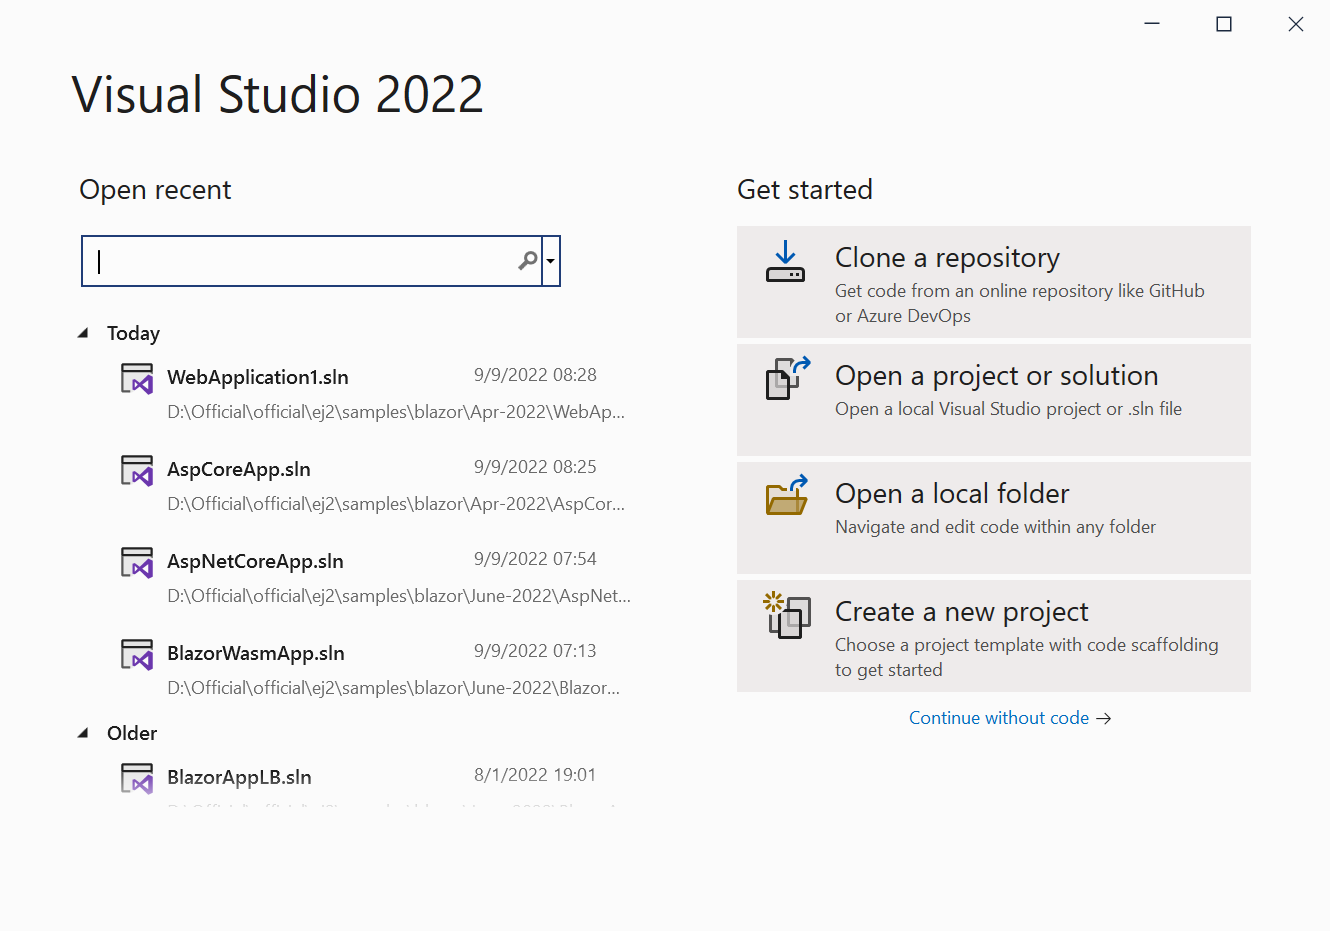 Creating a new project in Visual Studio 2022